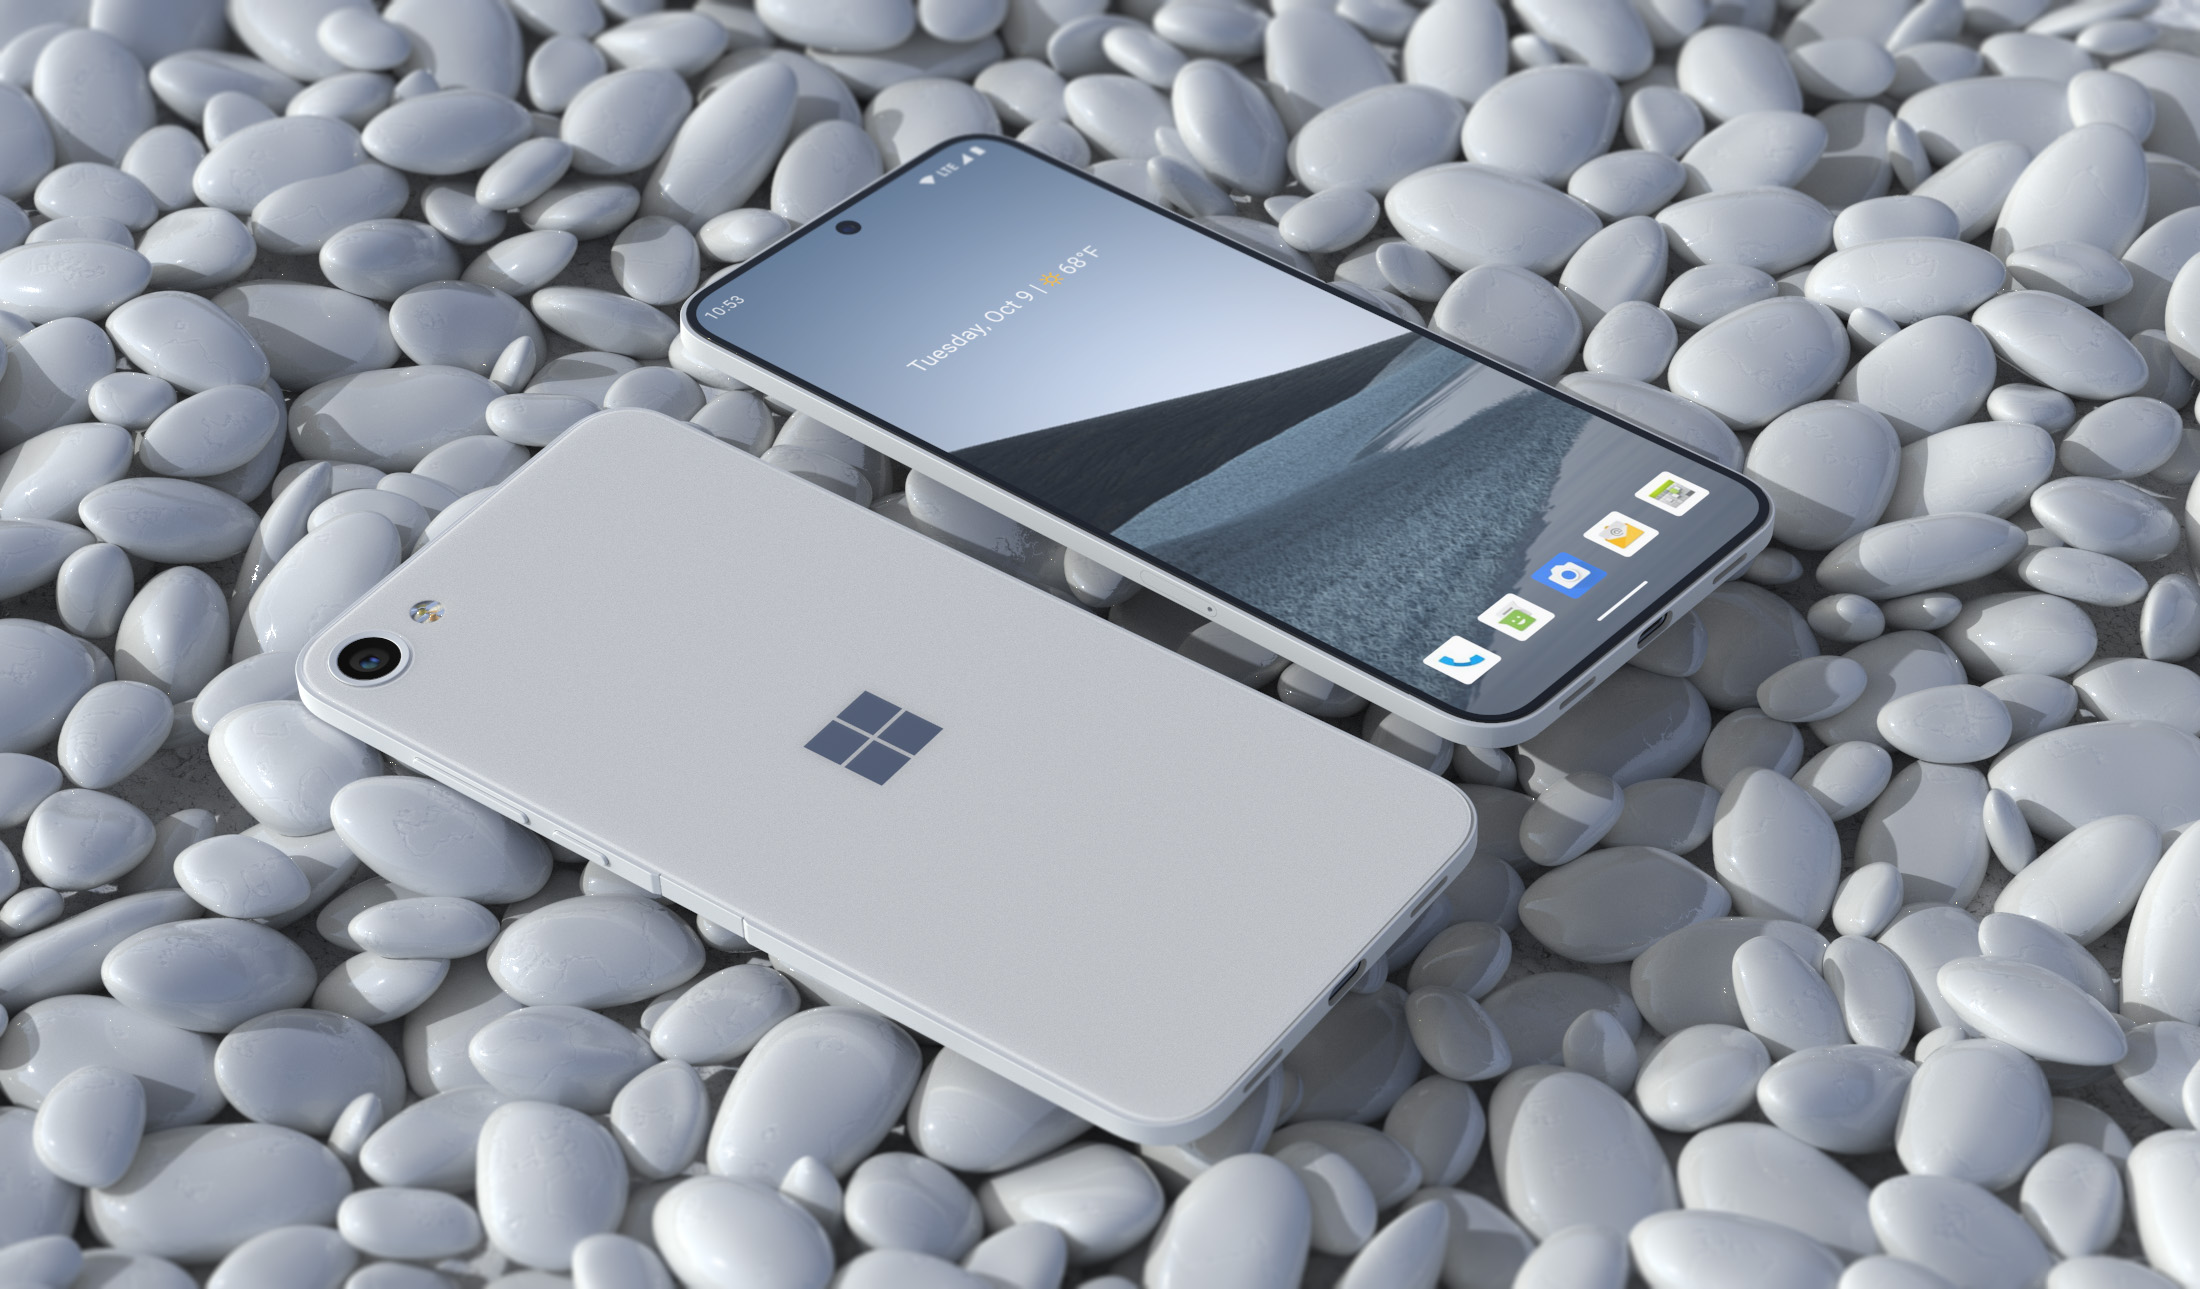 Microsoft Surface Solo concept render showcases the smartphone